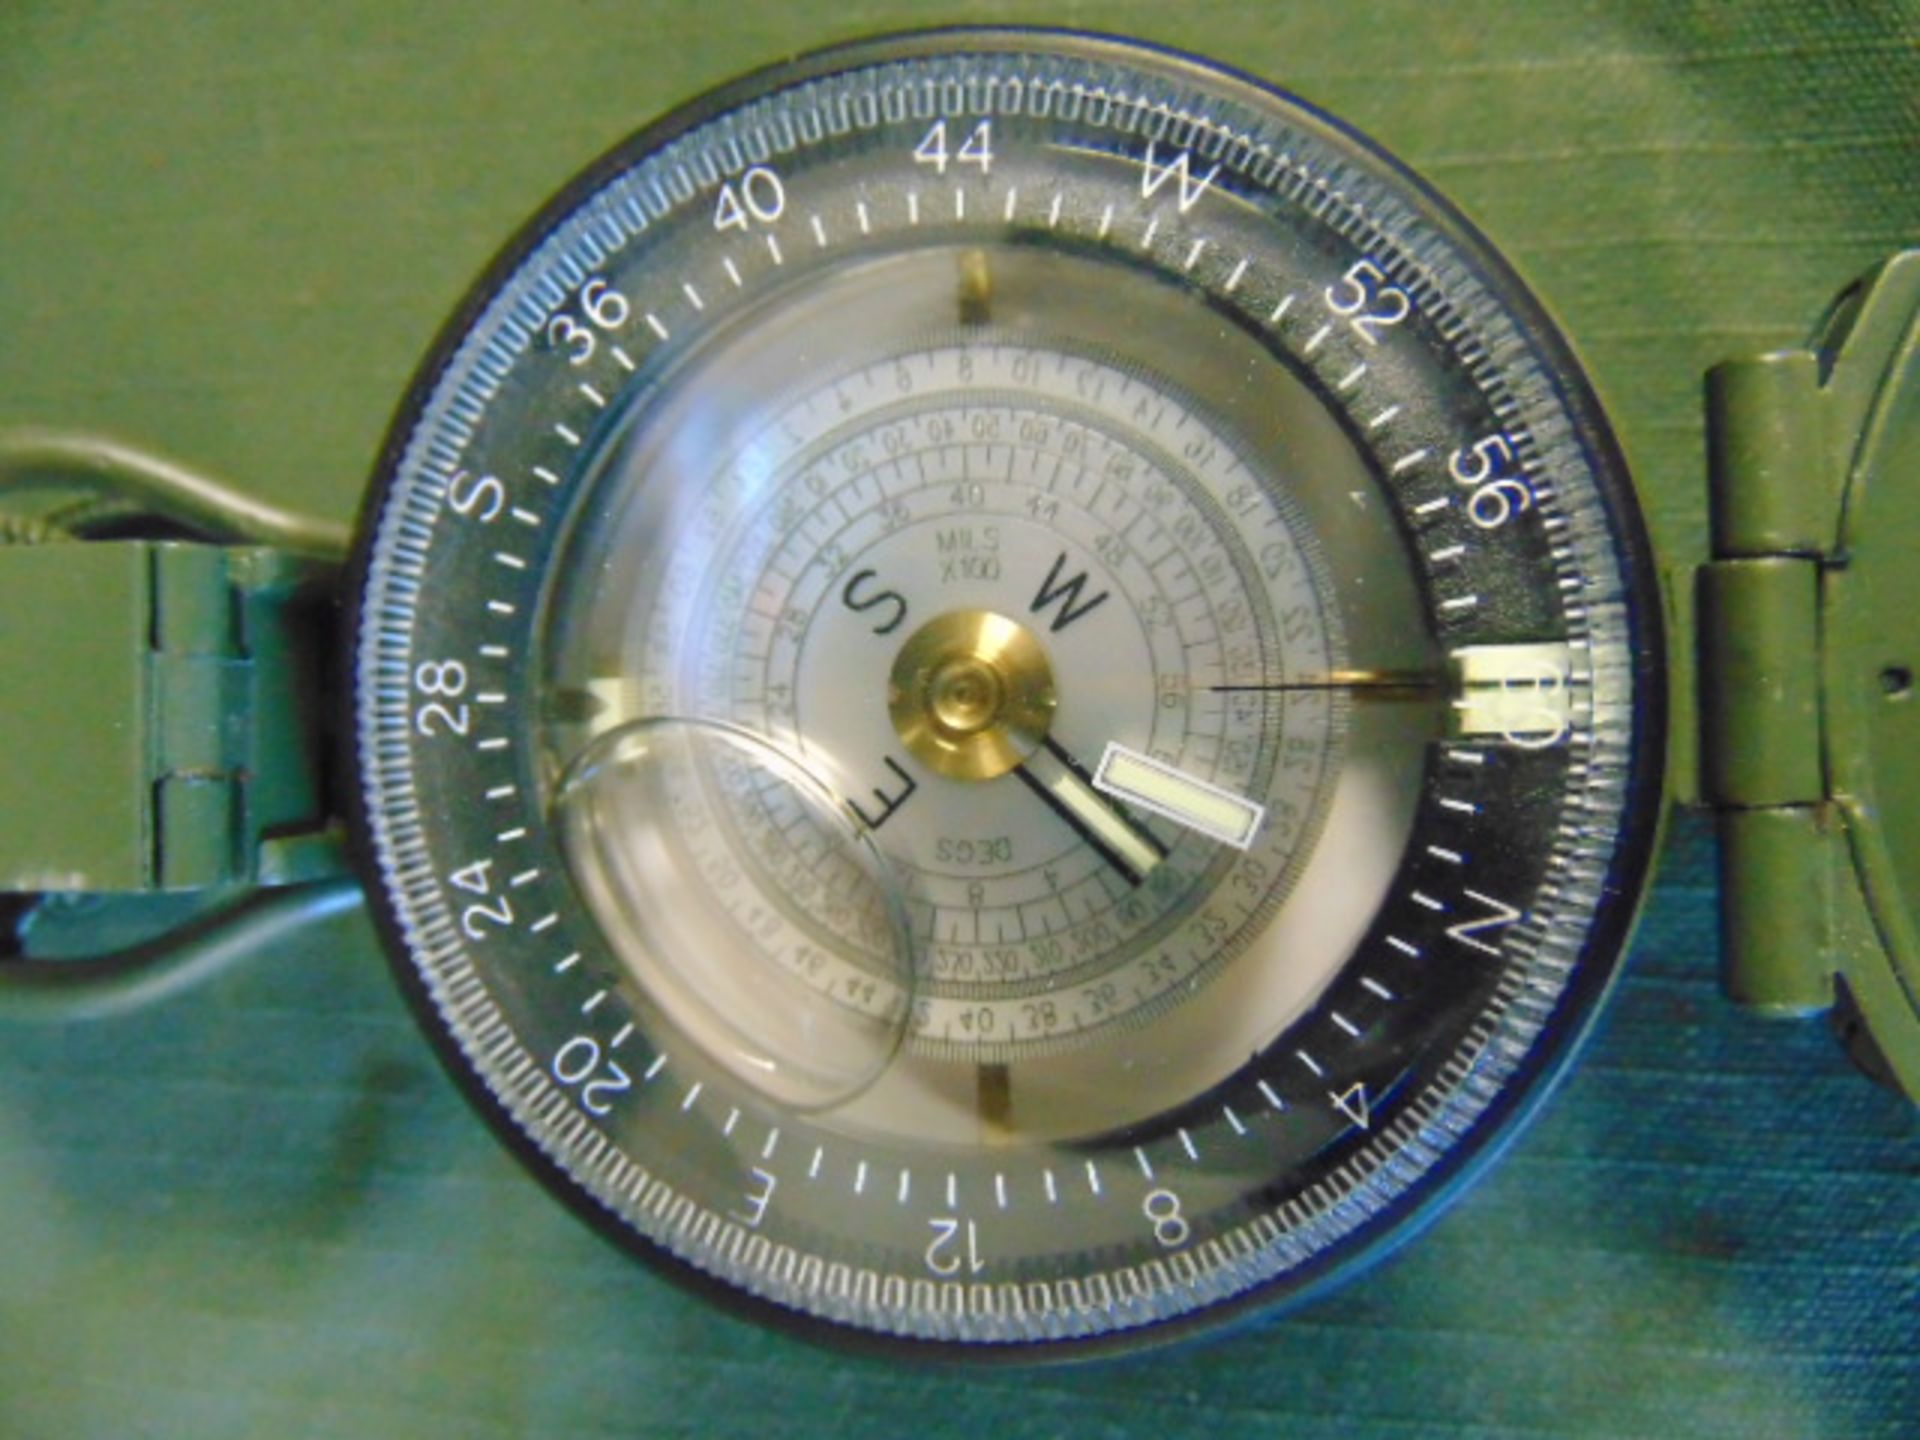 Francis Baker M88 Pristatic Compass - Image 3 of 3